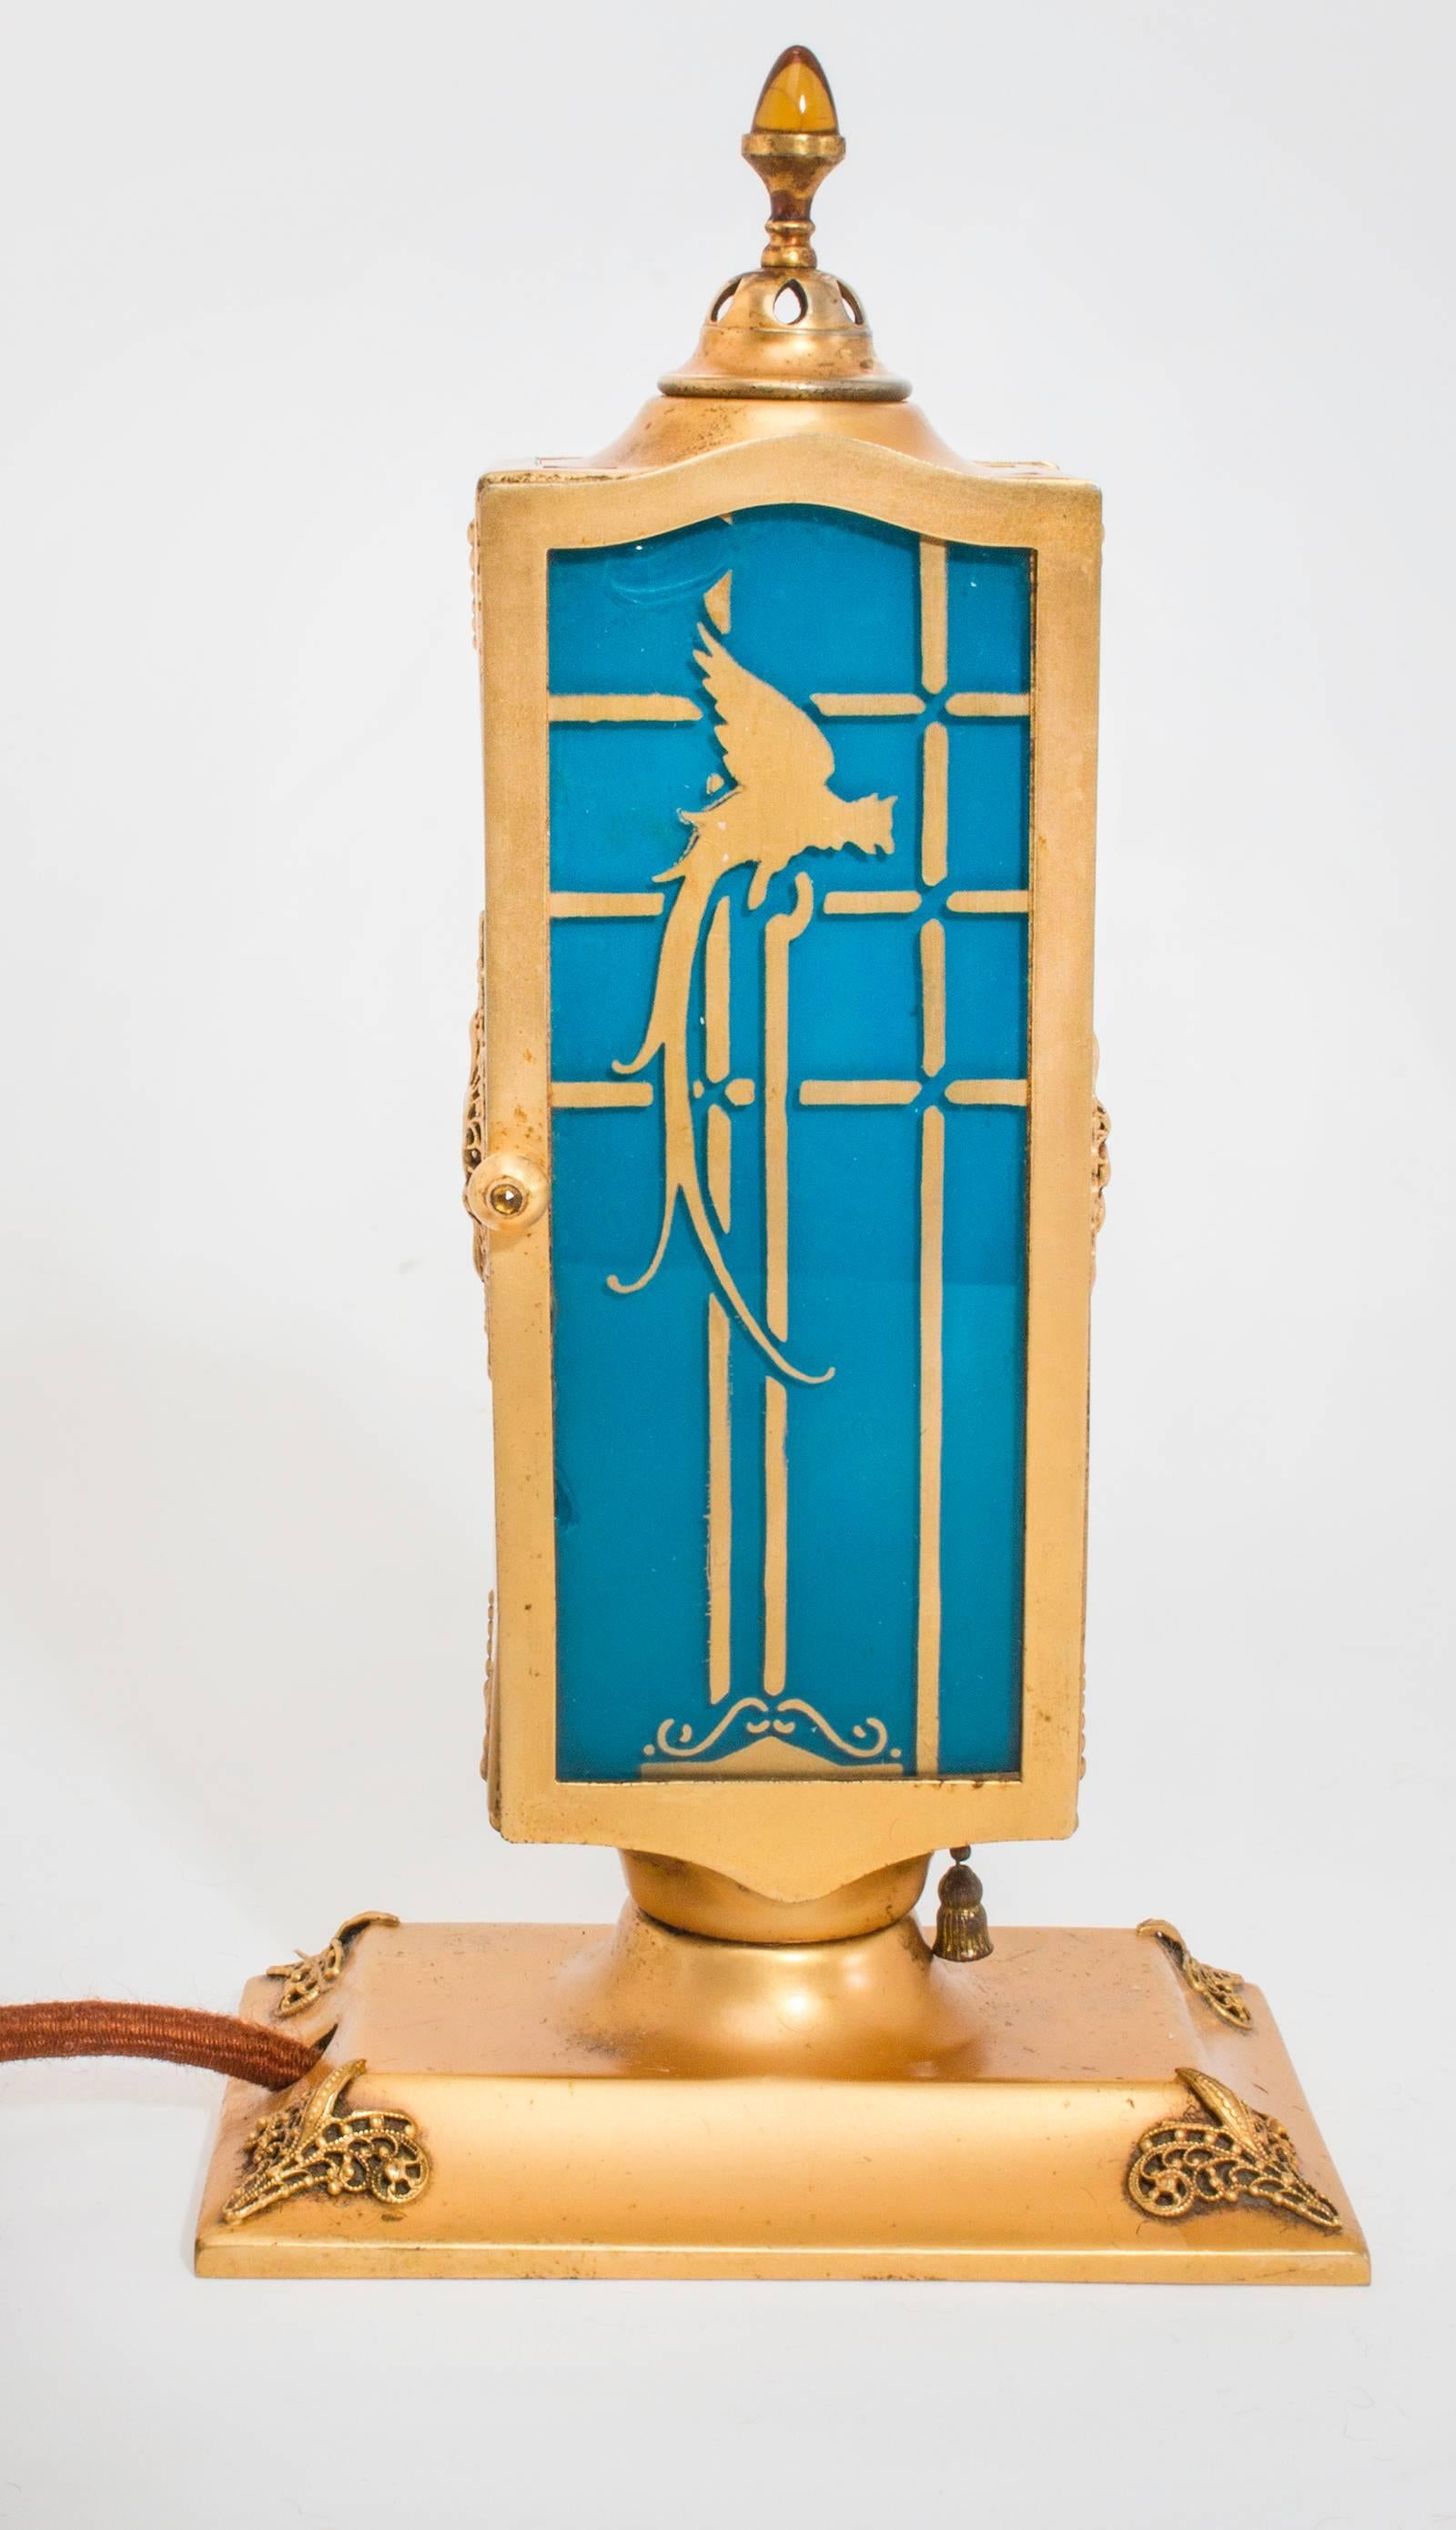 DeVilbiss perfume lamp from 1926. Two blue glass doors with gilt parrots on each doors. Interior of the glass doors are enameled in blue, the front side is parrots in gilt.
The amber glass jewels are set into the door handles and a larger one is